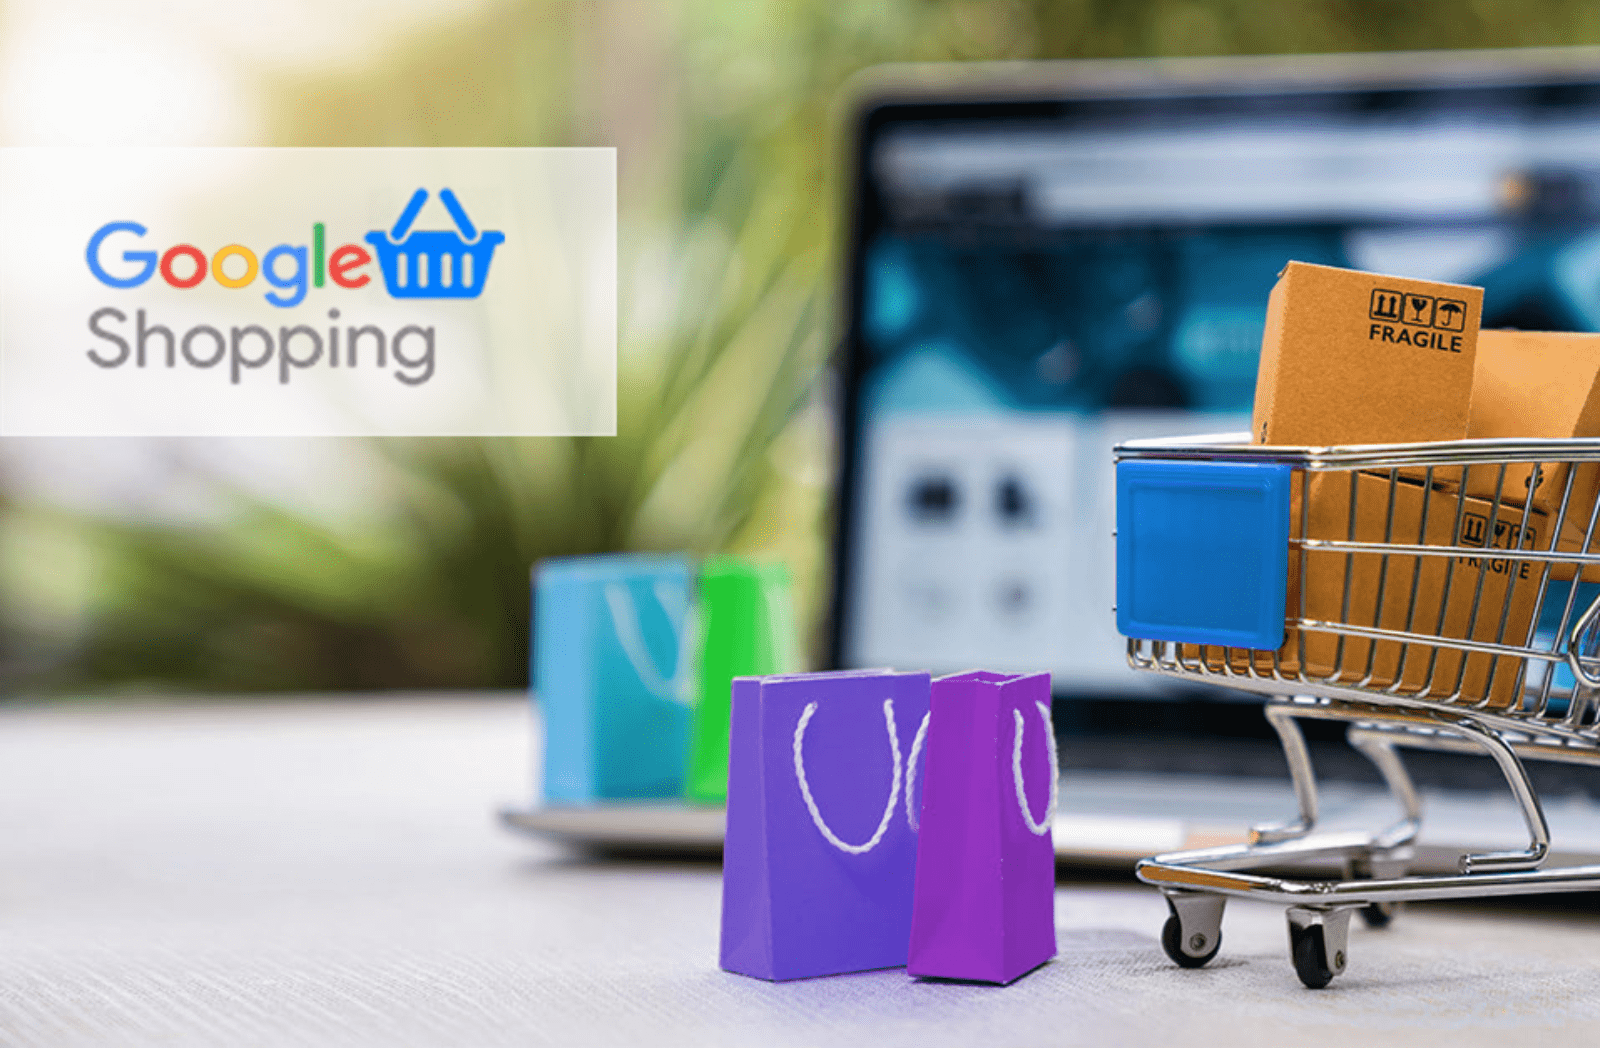 How ShoppingIQ gets you 20% DISCOUNT on Google Shopping Spends?